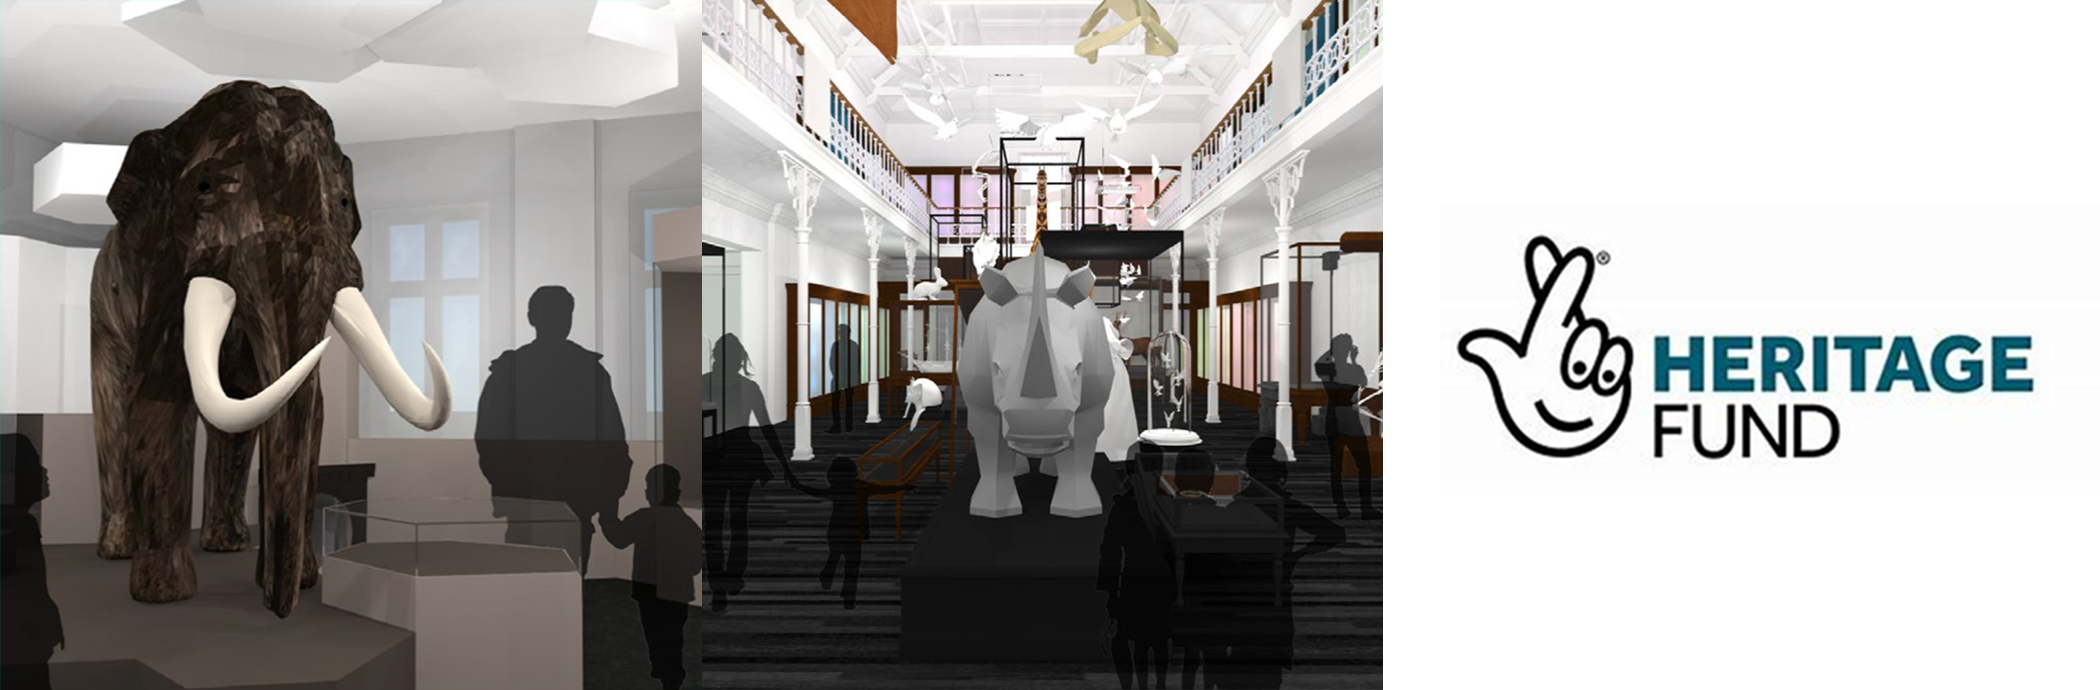 Museum Re- Development images Mammoth, Rhino and National Heritage Fund logo